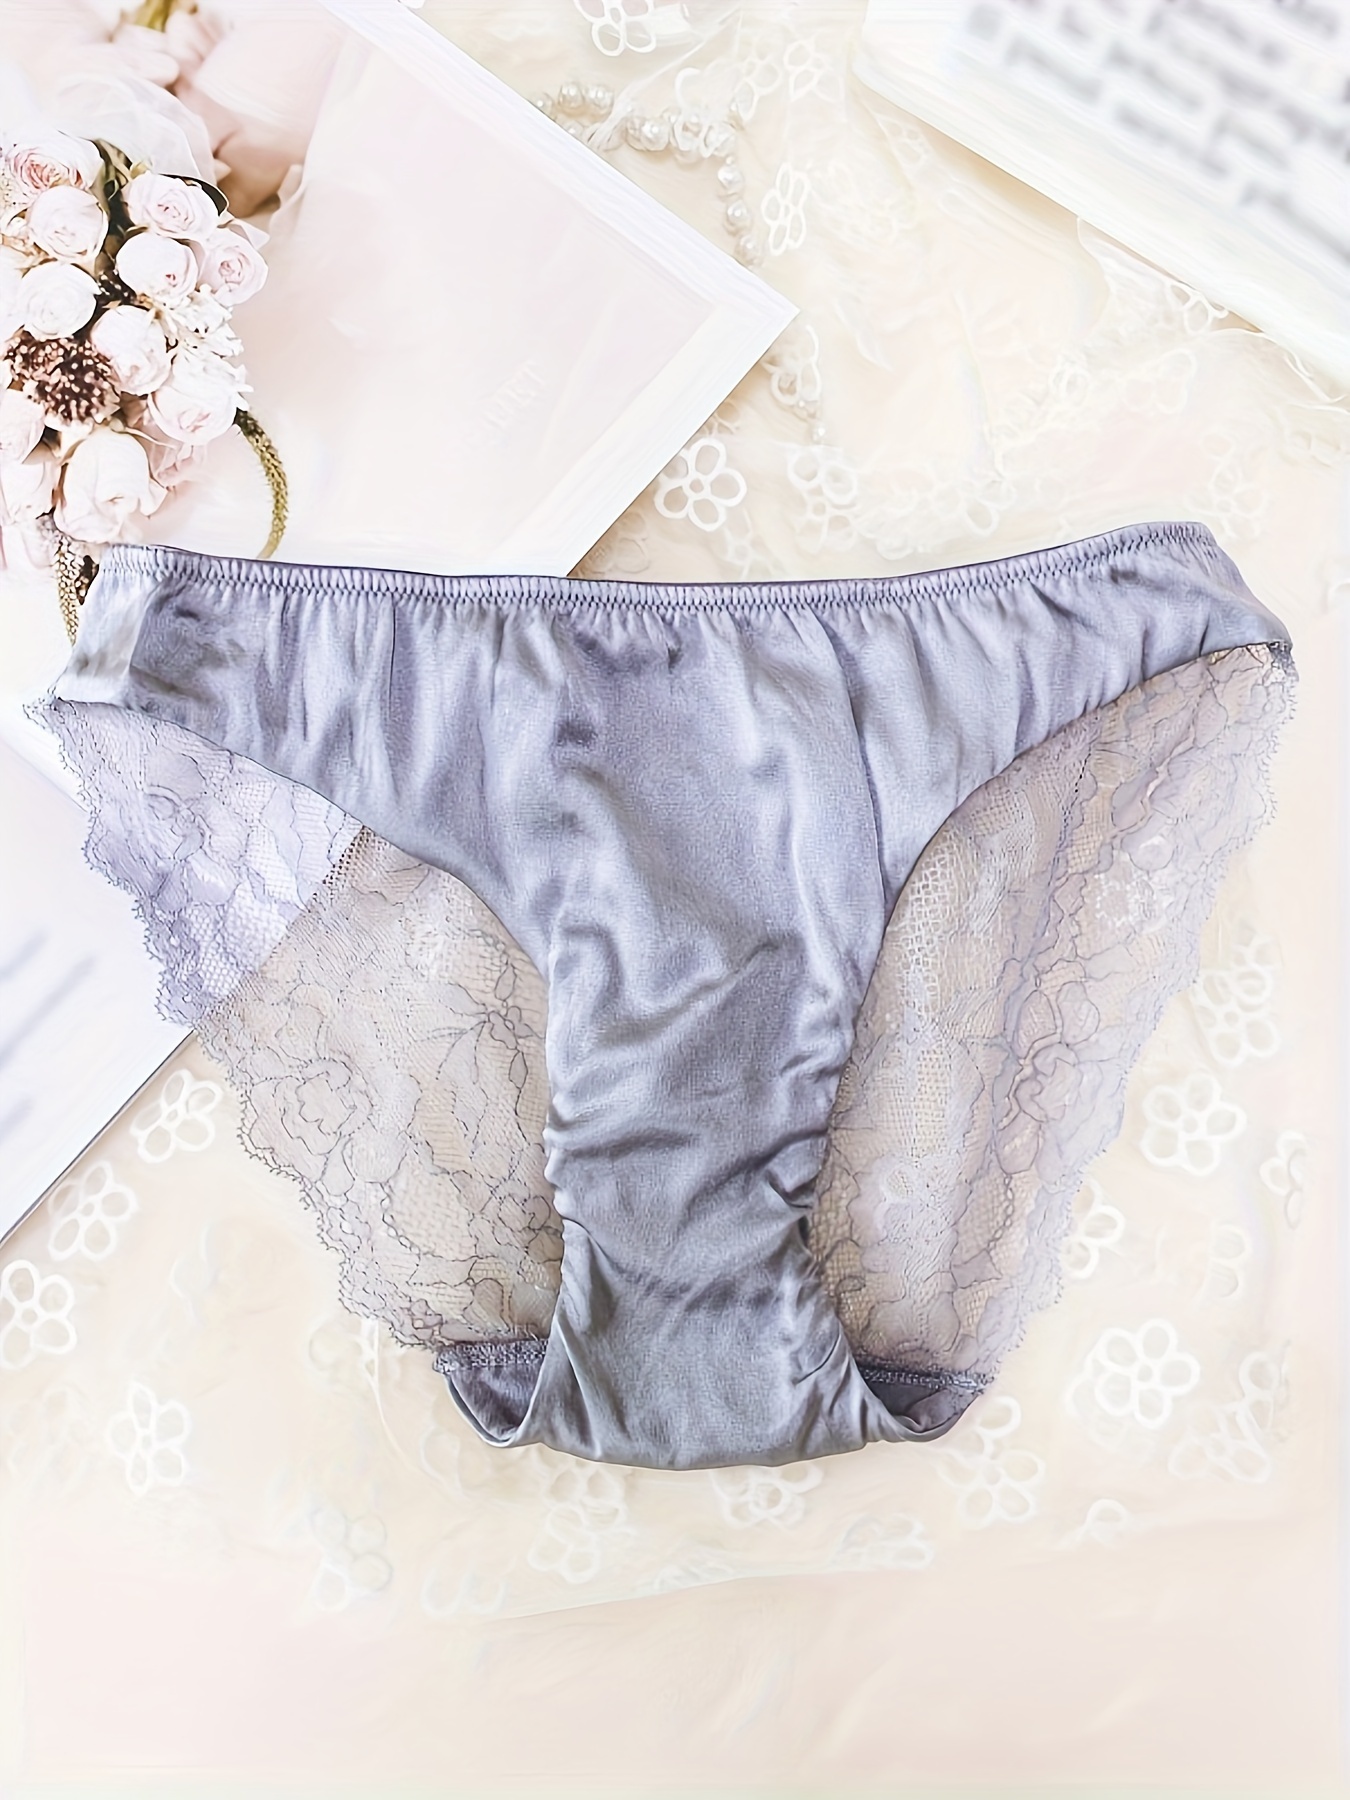 Soft Ice Silk Underwear Lightweight Satin Sexy Panties Lacy Panties Bow  Lingerie Ruffle Panties for Women Smooth Briefs